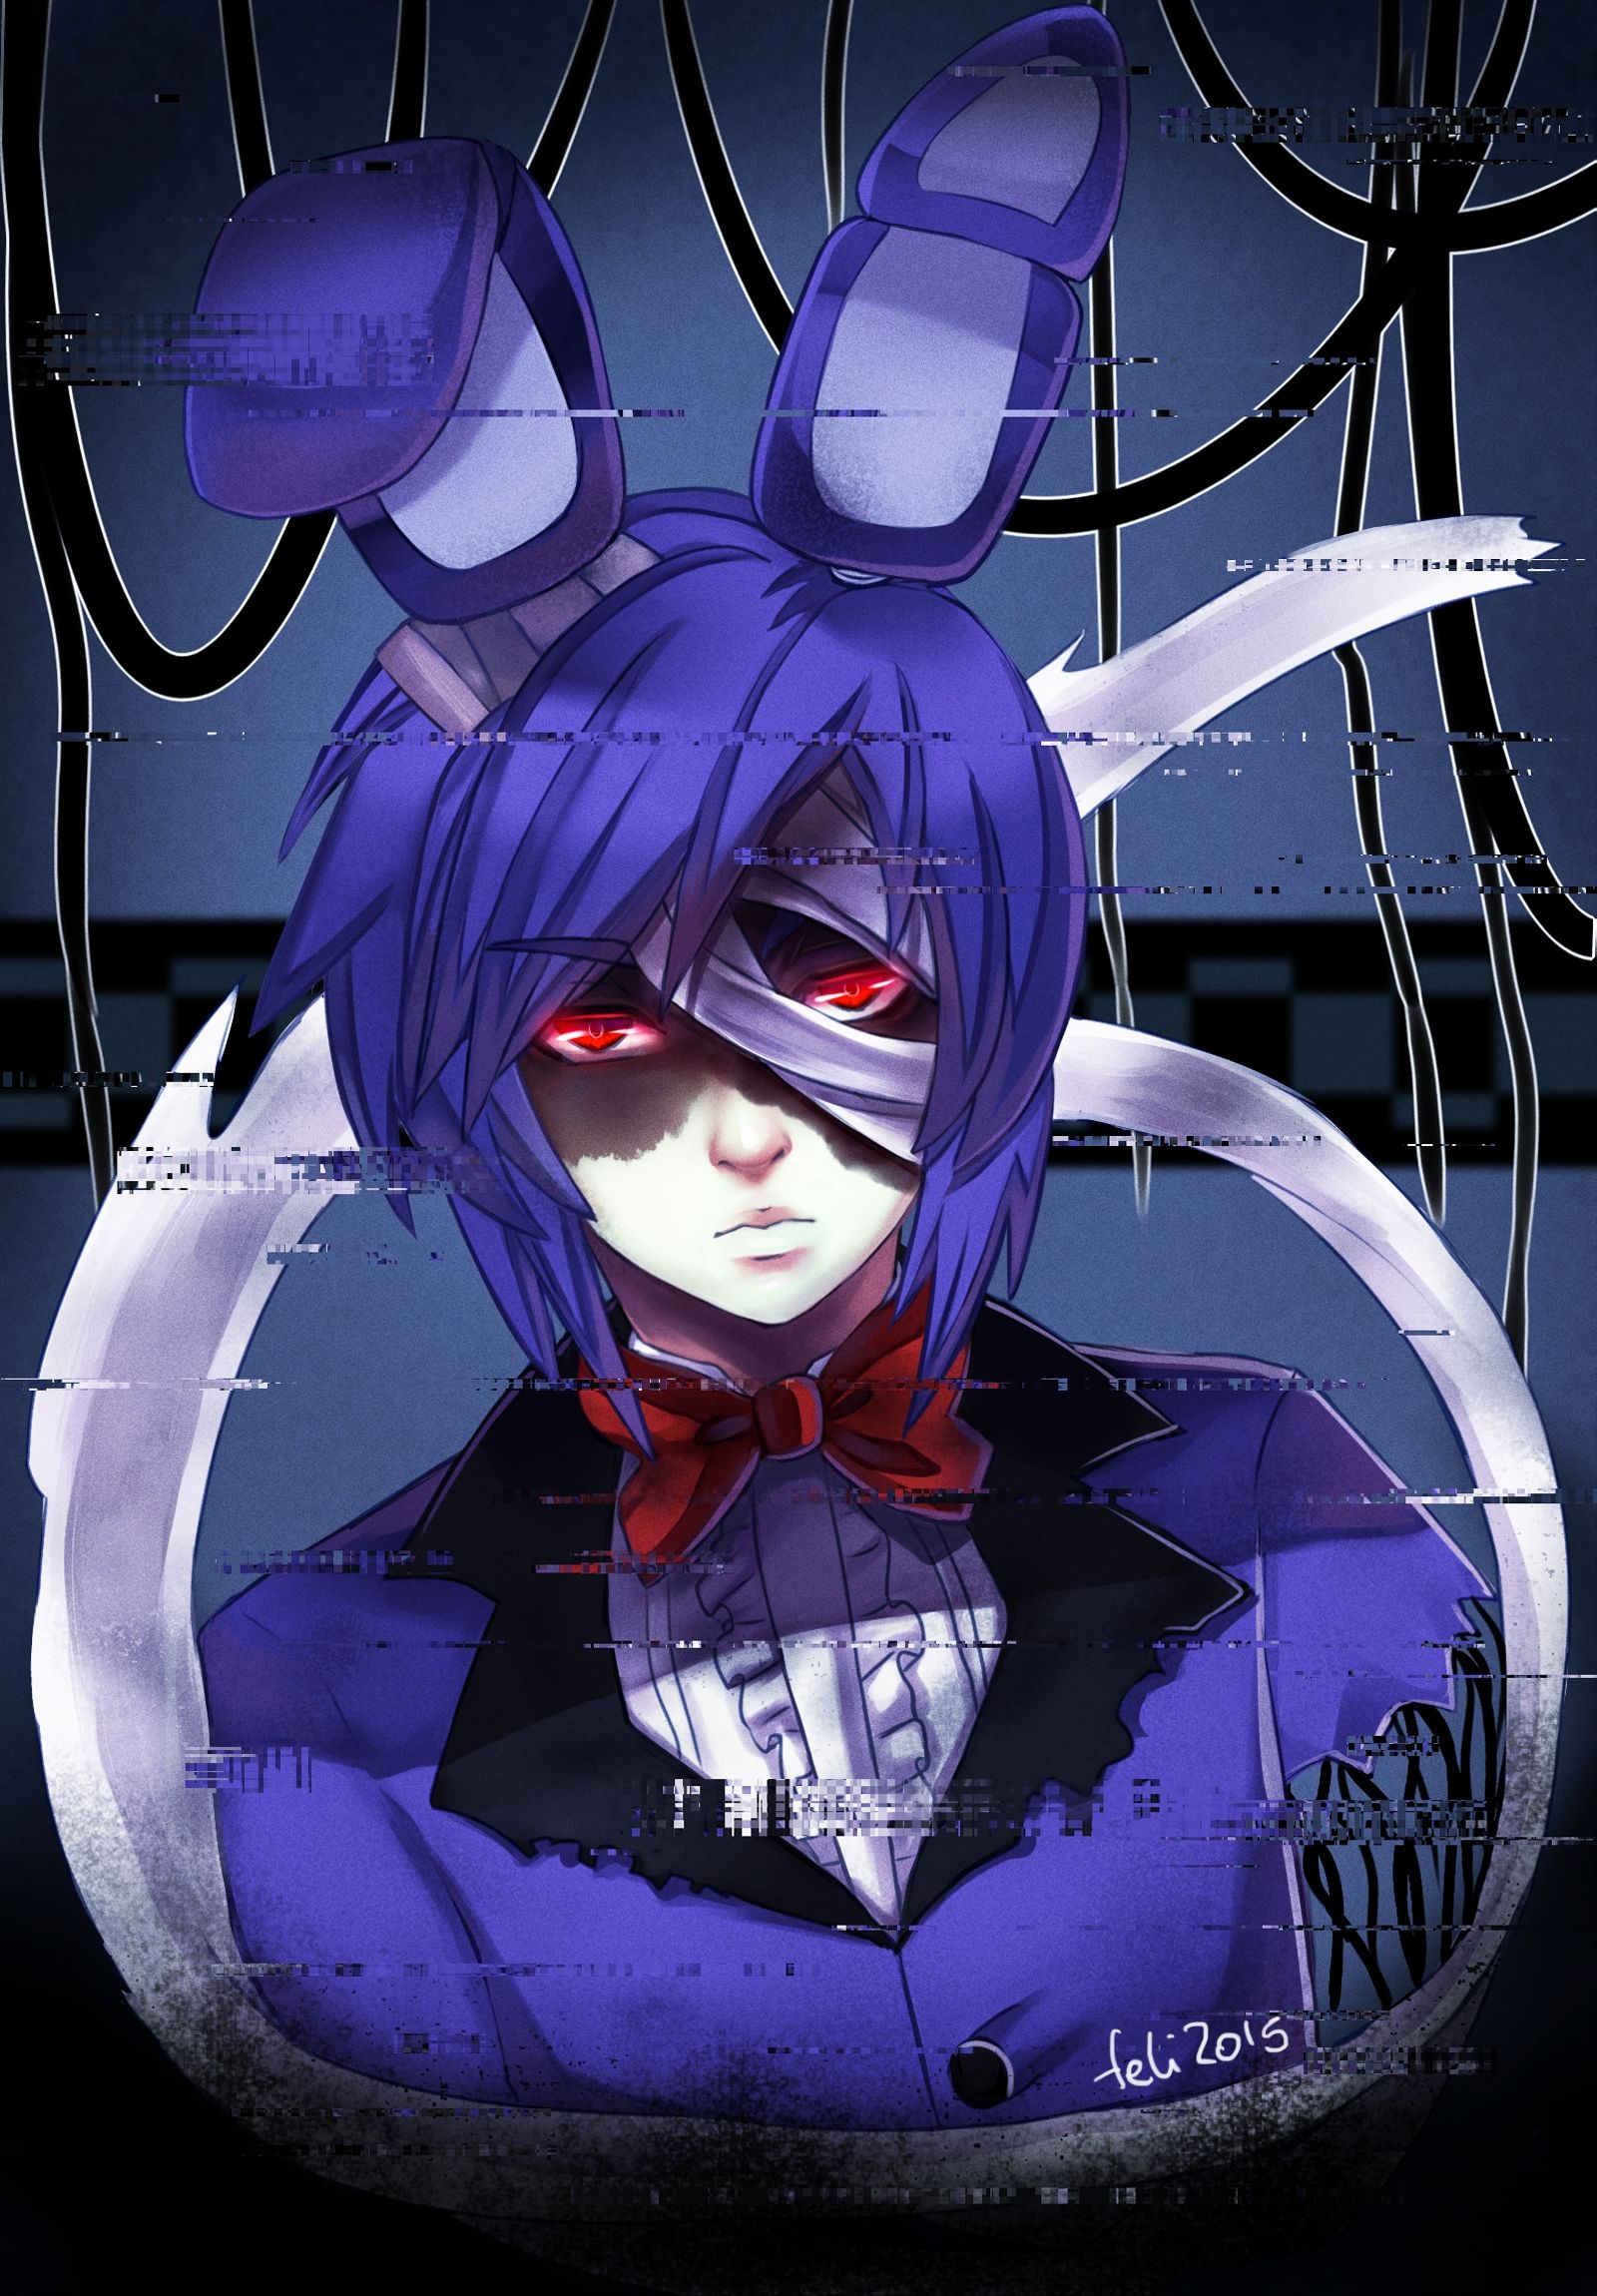 ANIME FNAF - ANIME FNAF updated their profile picture.